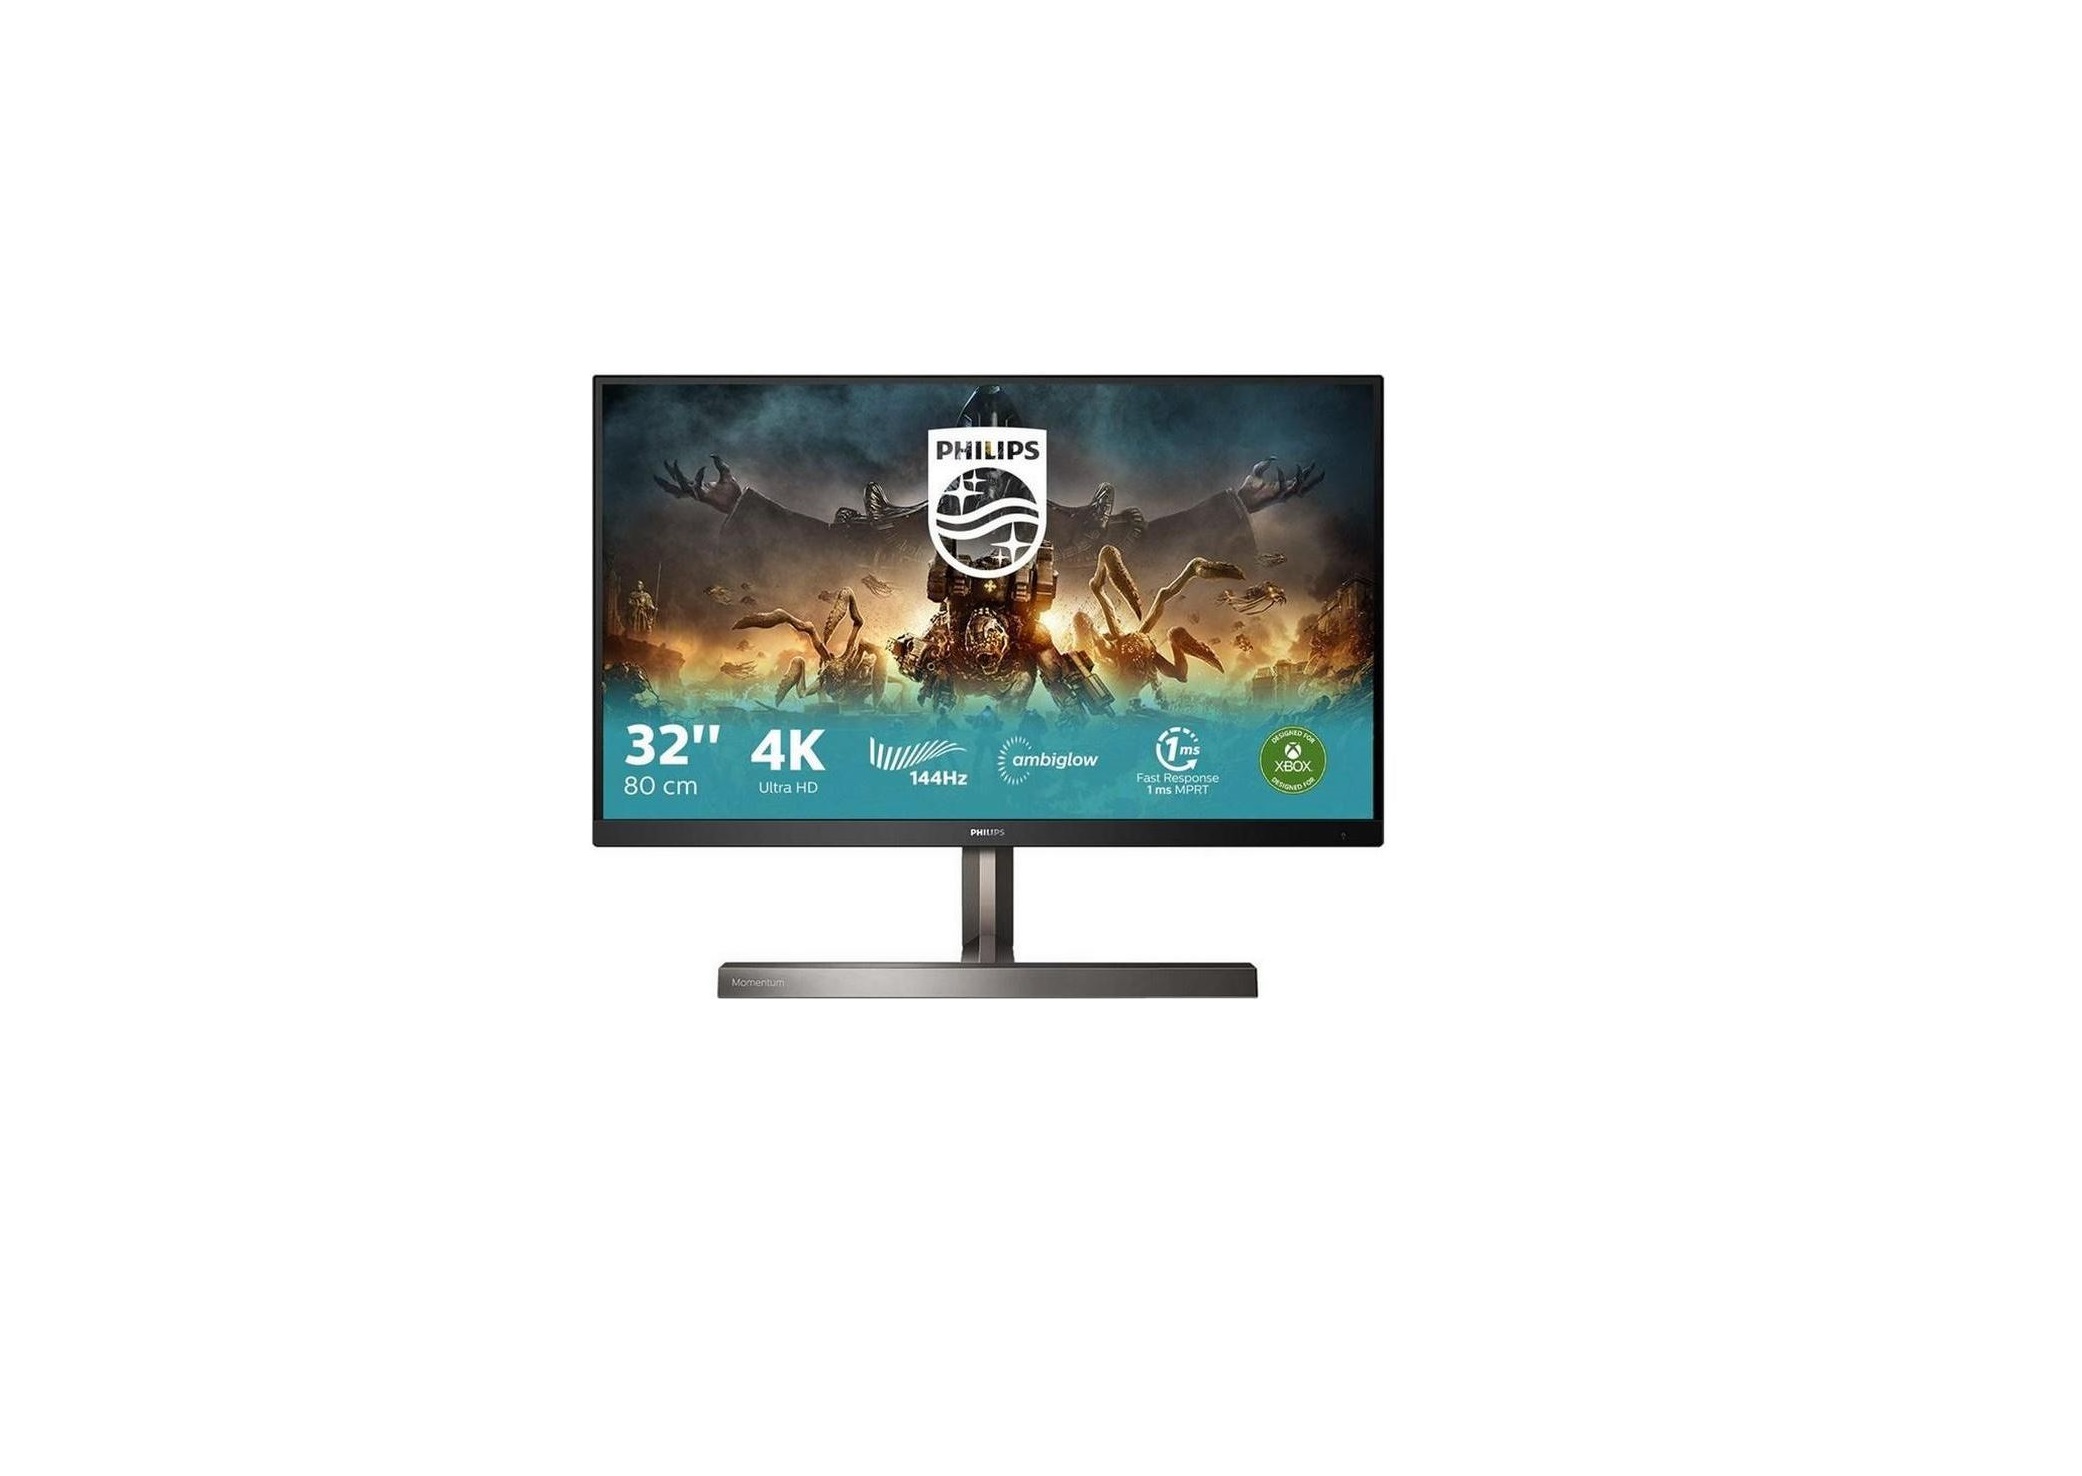 PHILIPS 329M1 Momentum 4K HDR Display Gaming Monitor User Guide - Featured image